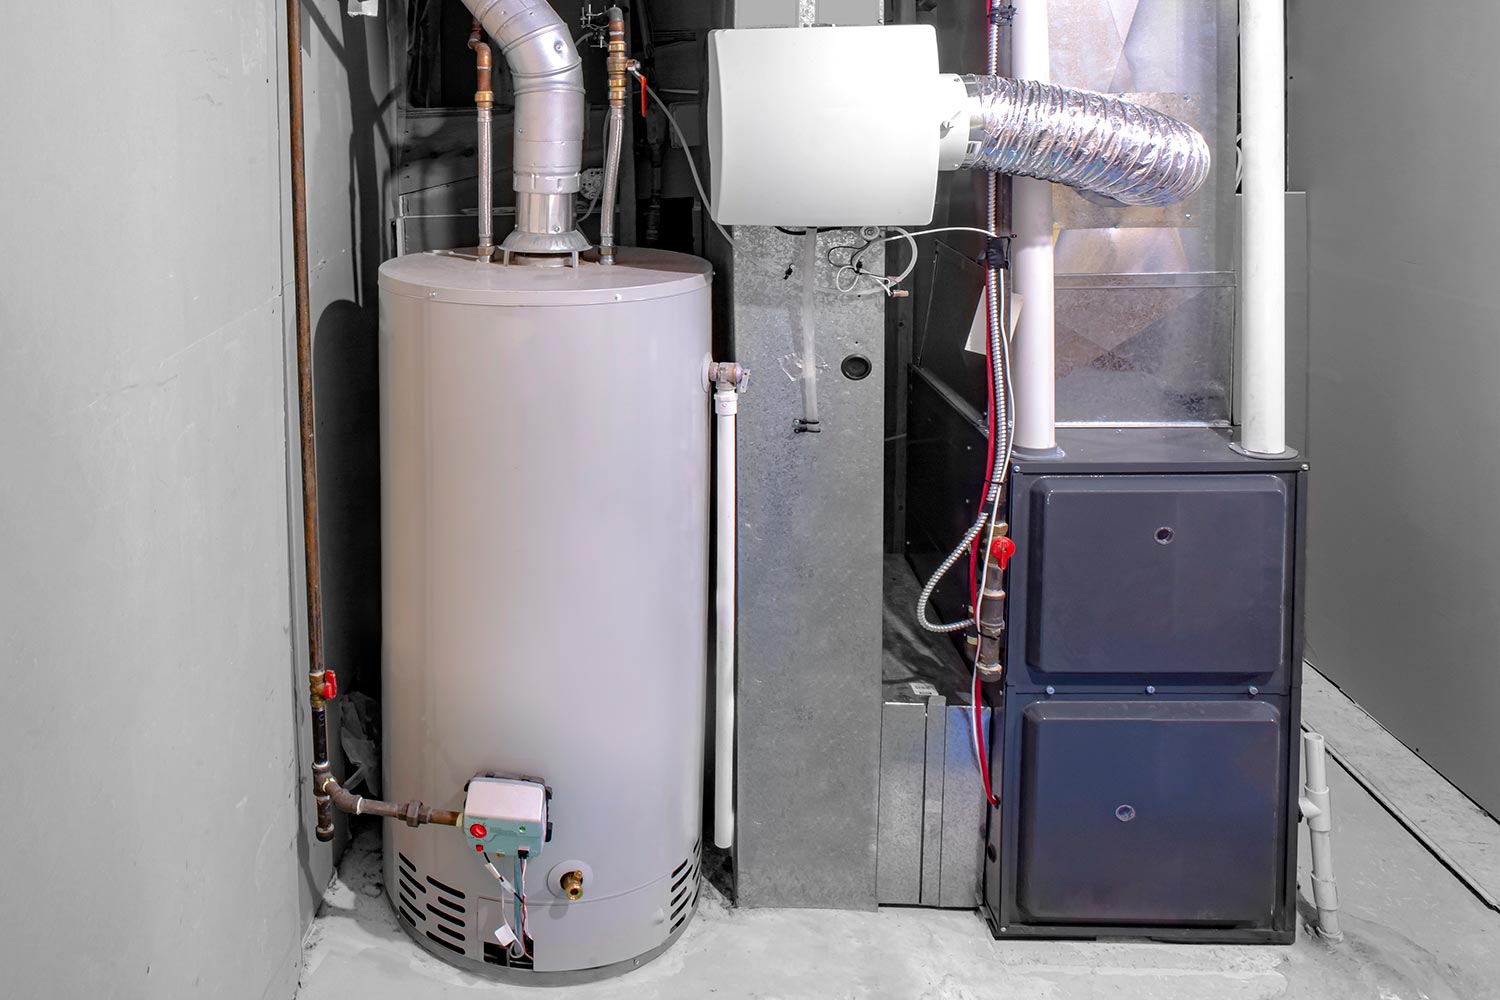 A home high efficiency furnace with a residential gas water heater and humidifier